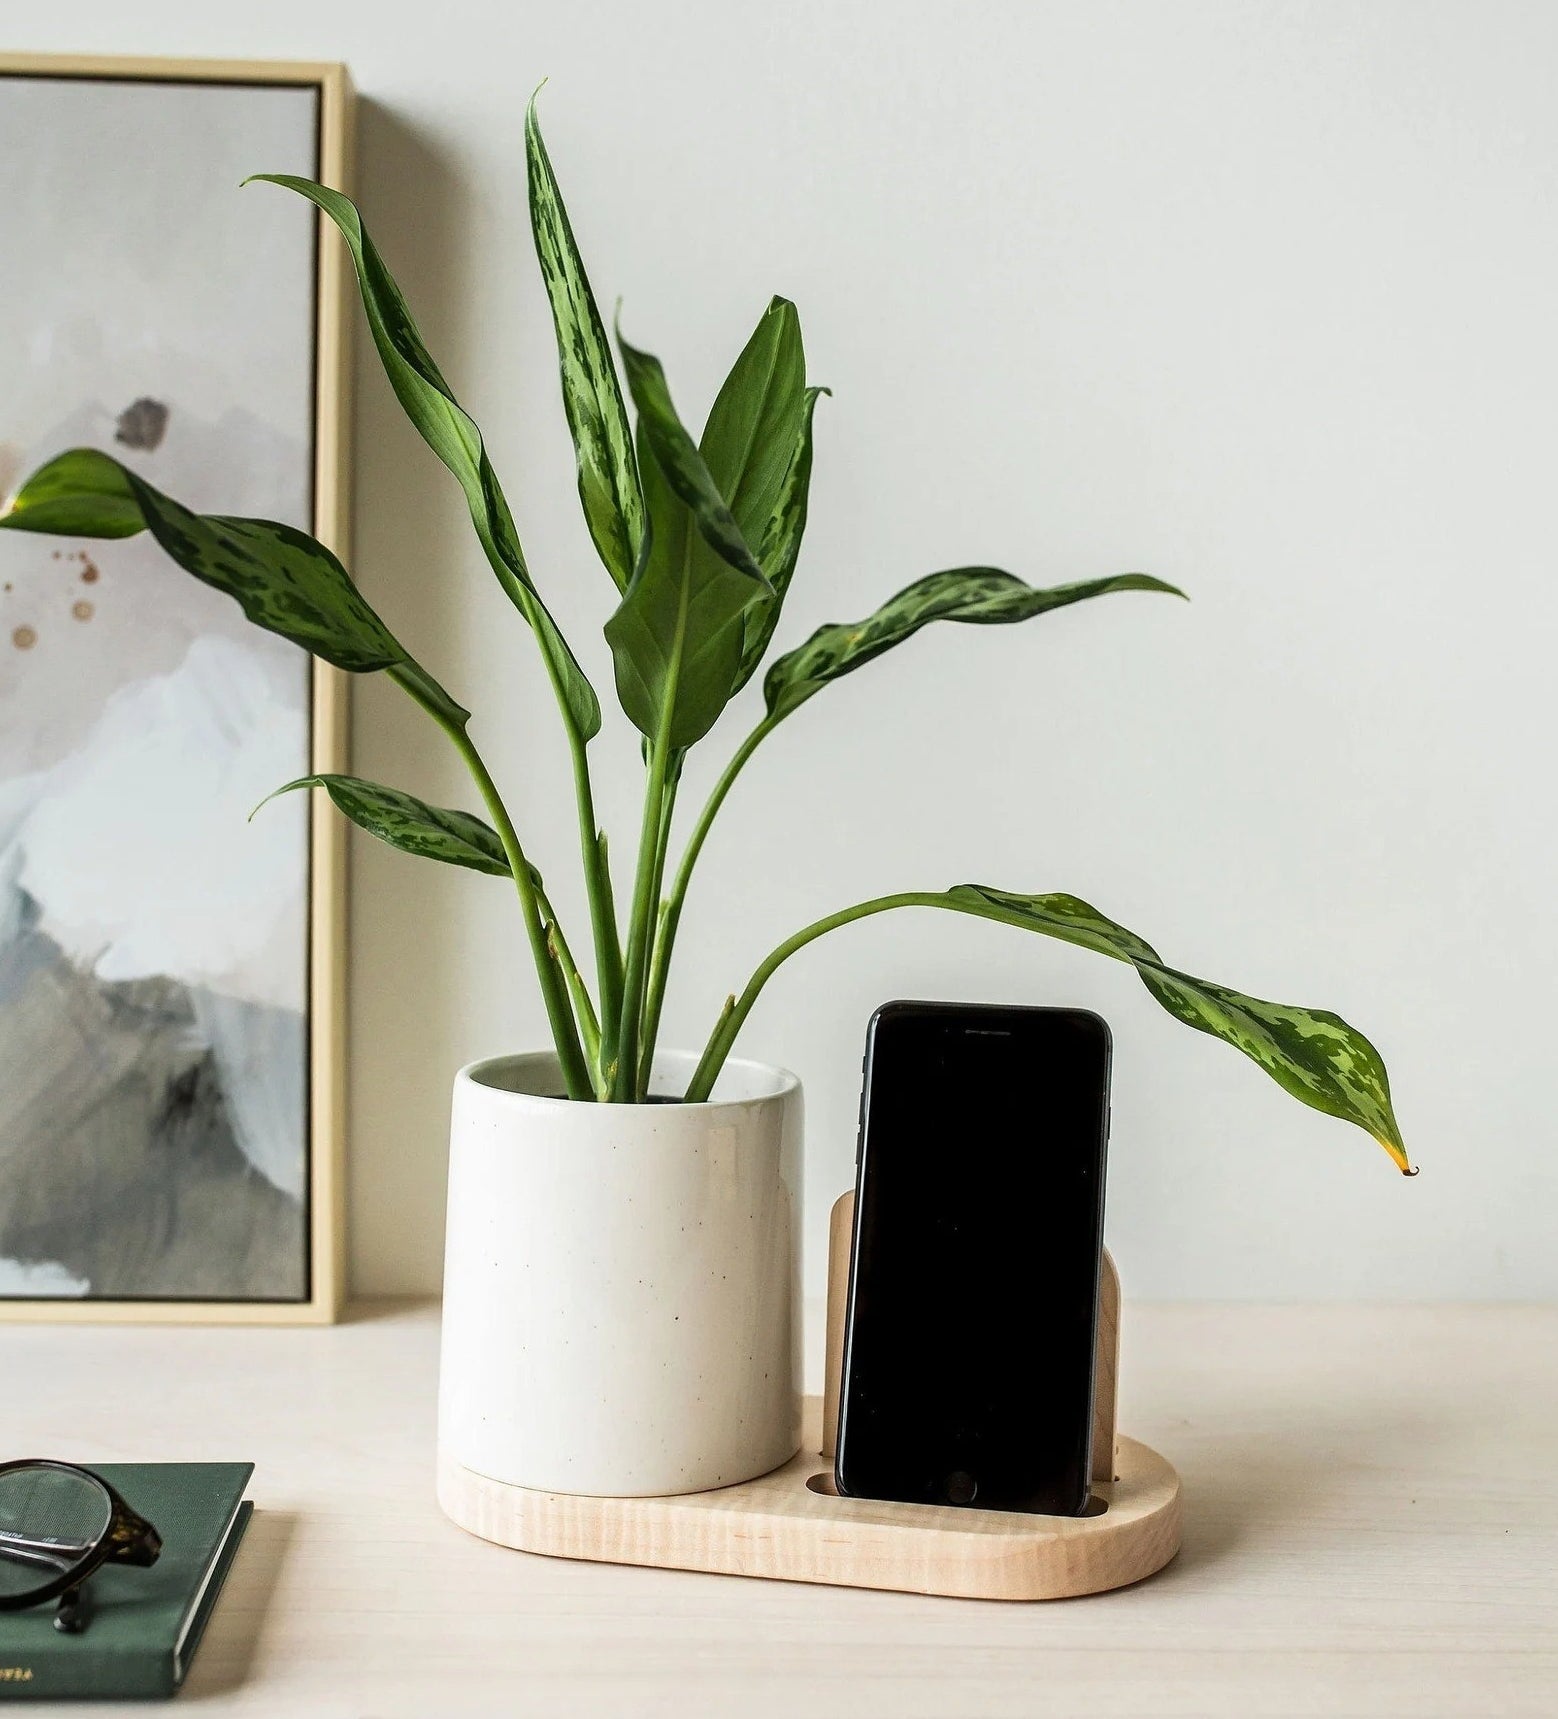 A planter and phone holder are shown